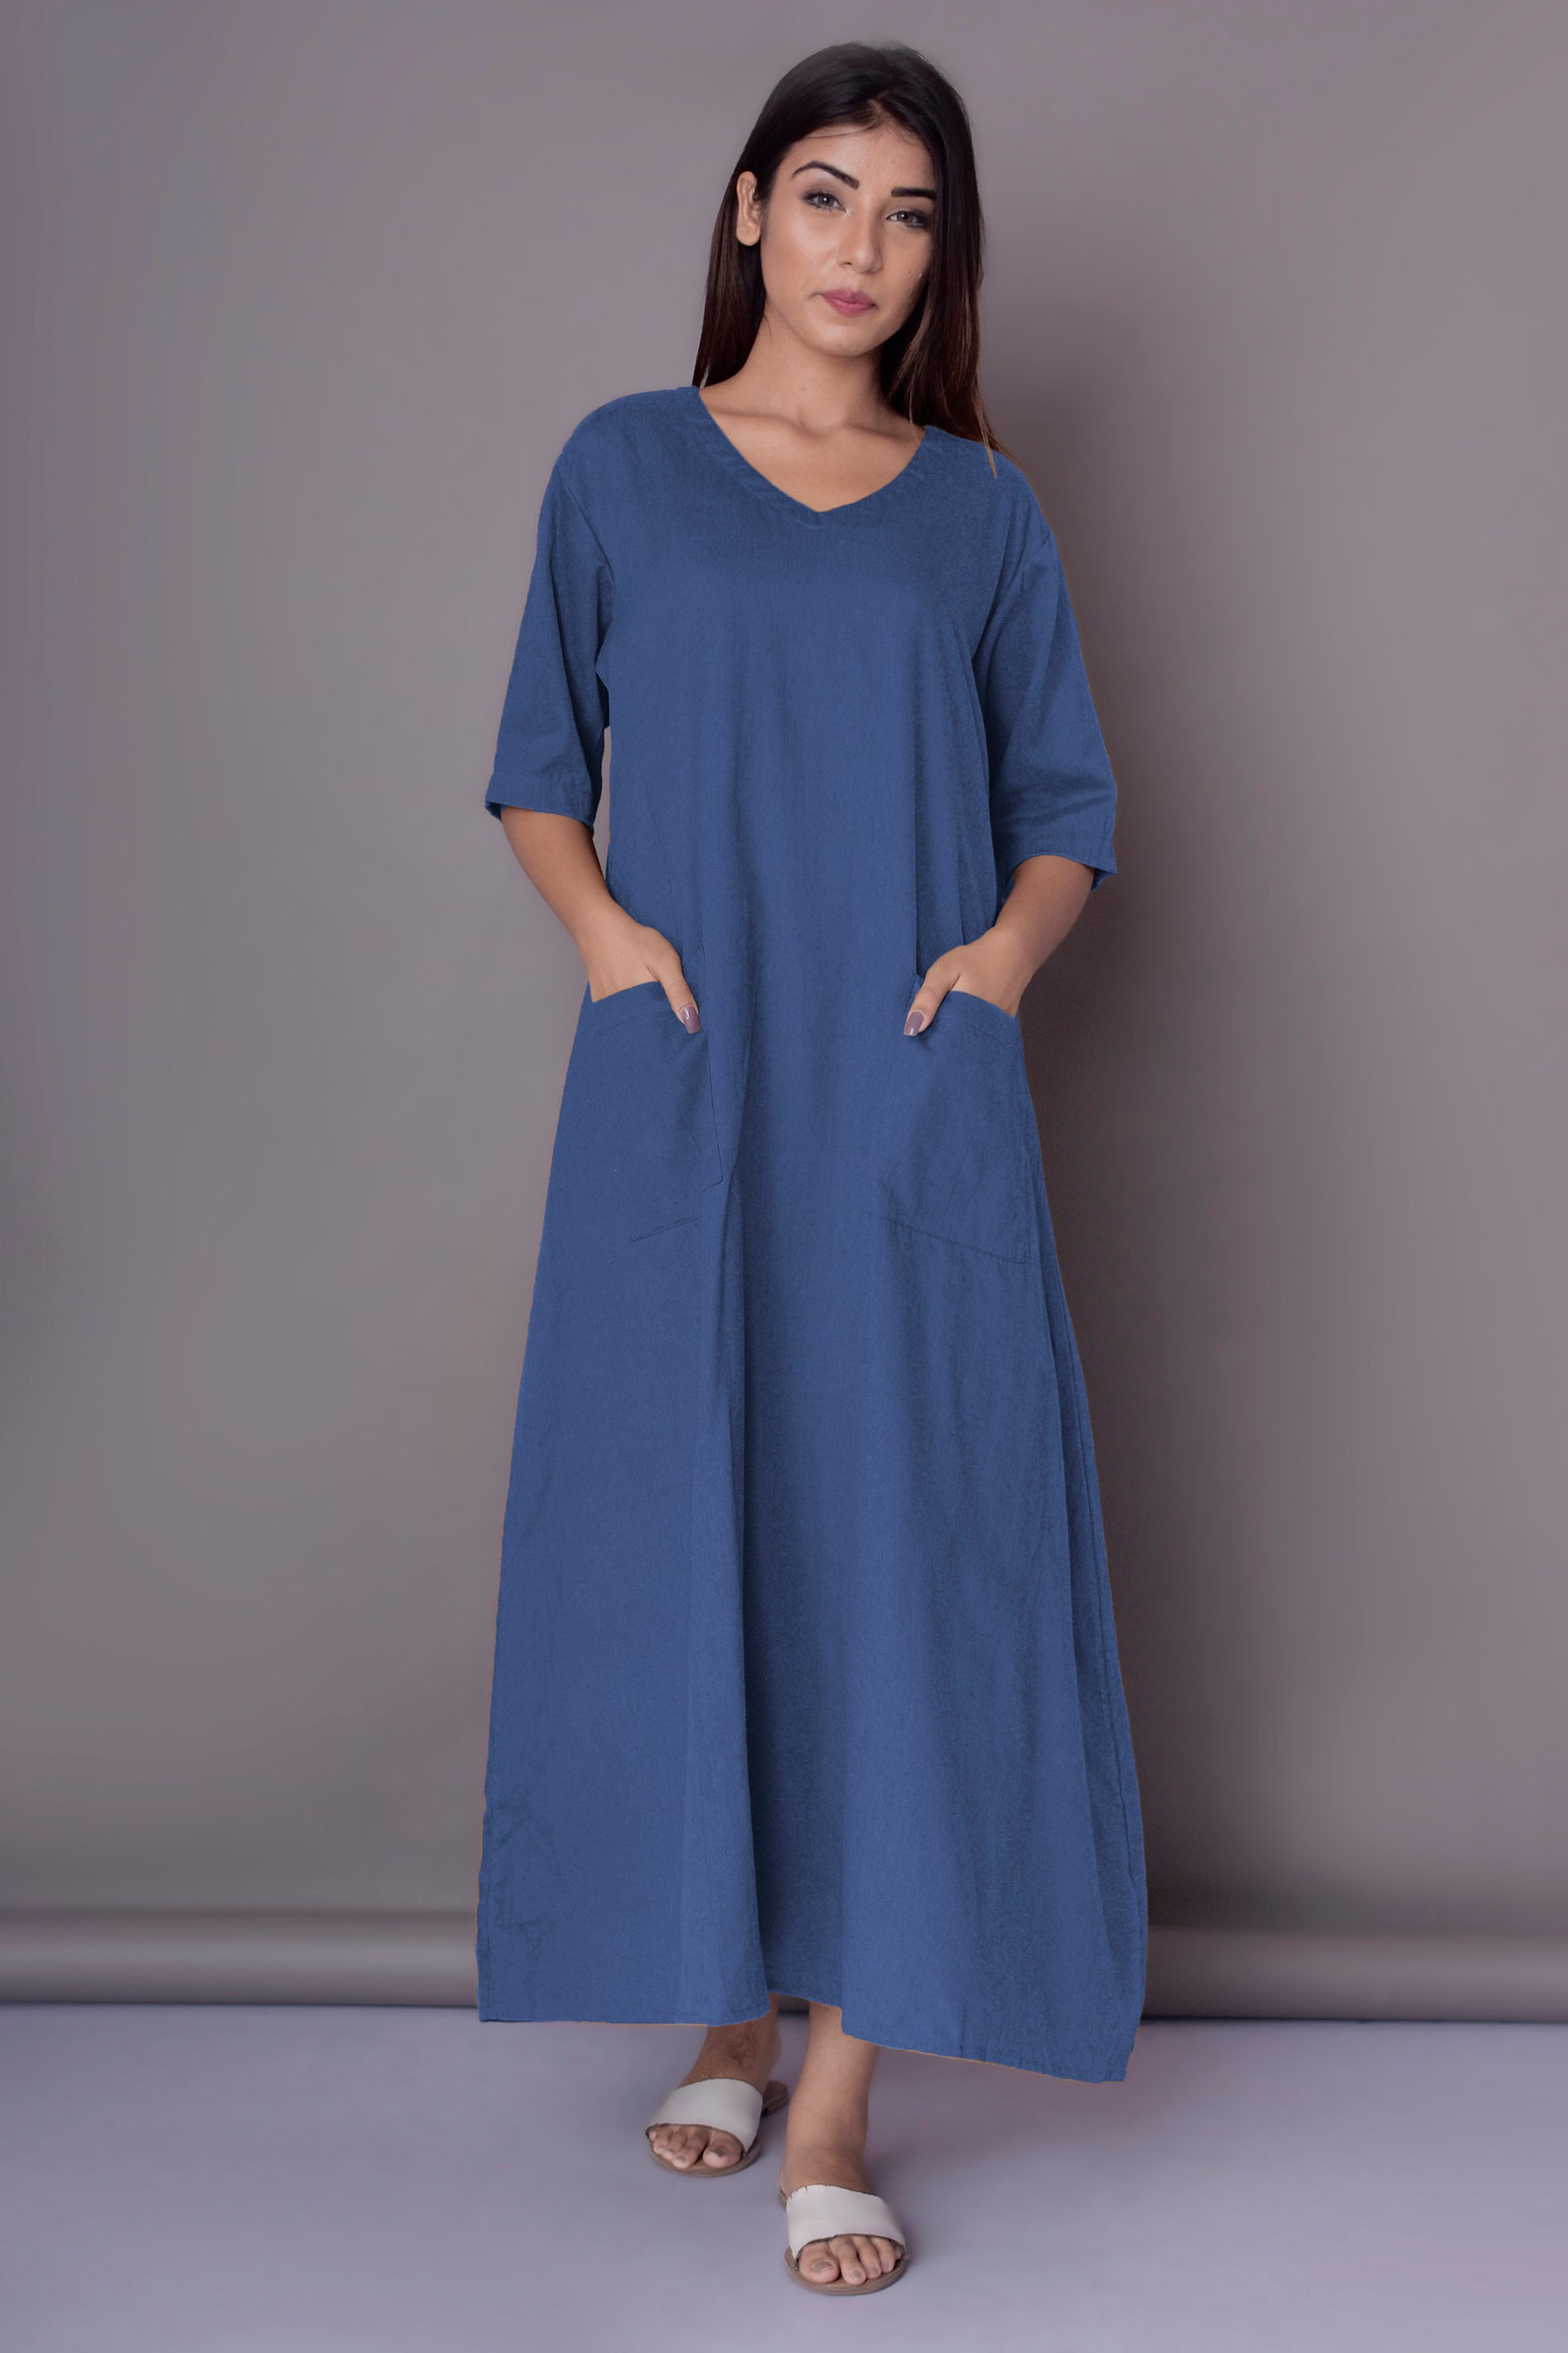 Linen Maxi Dress Tunic Dress With Patch Pockets Ankle Length - Etsy